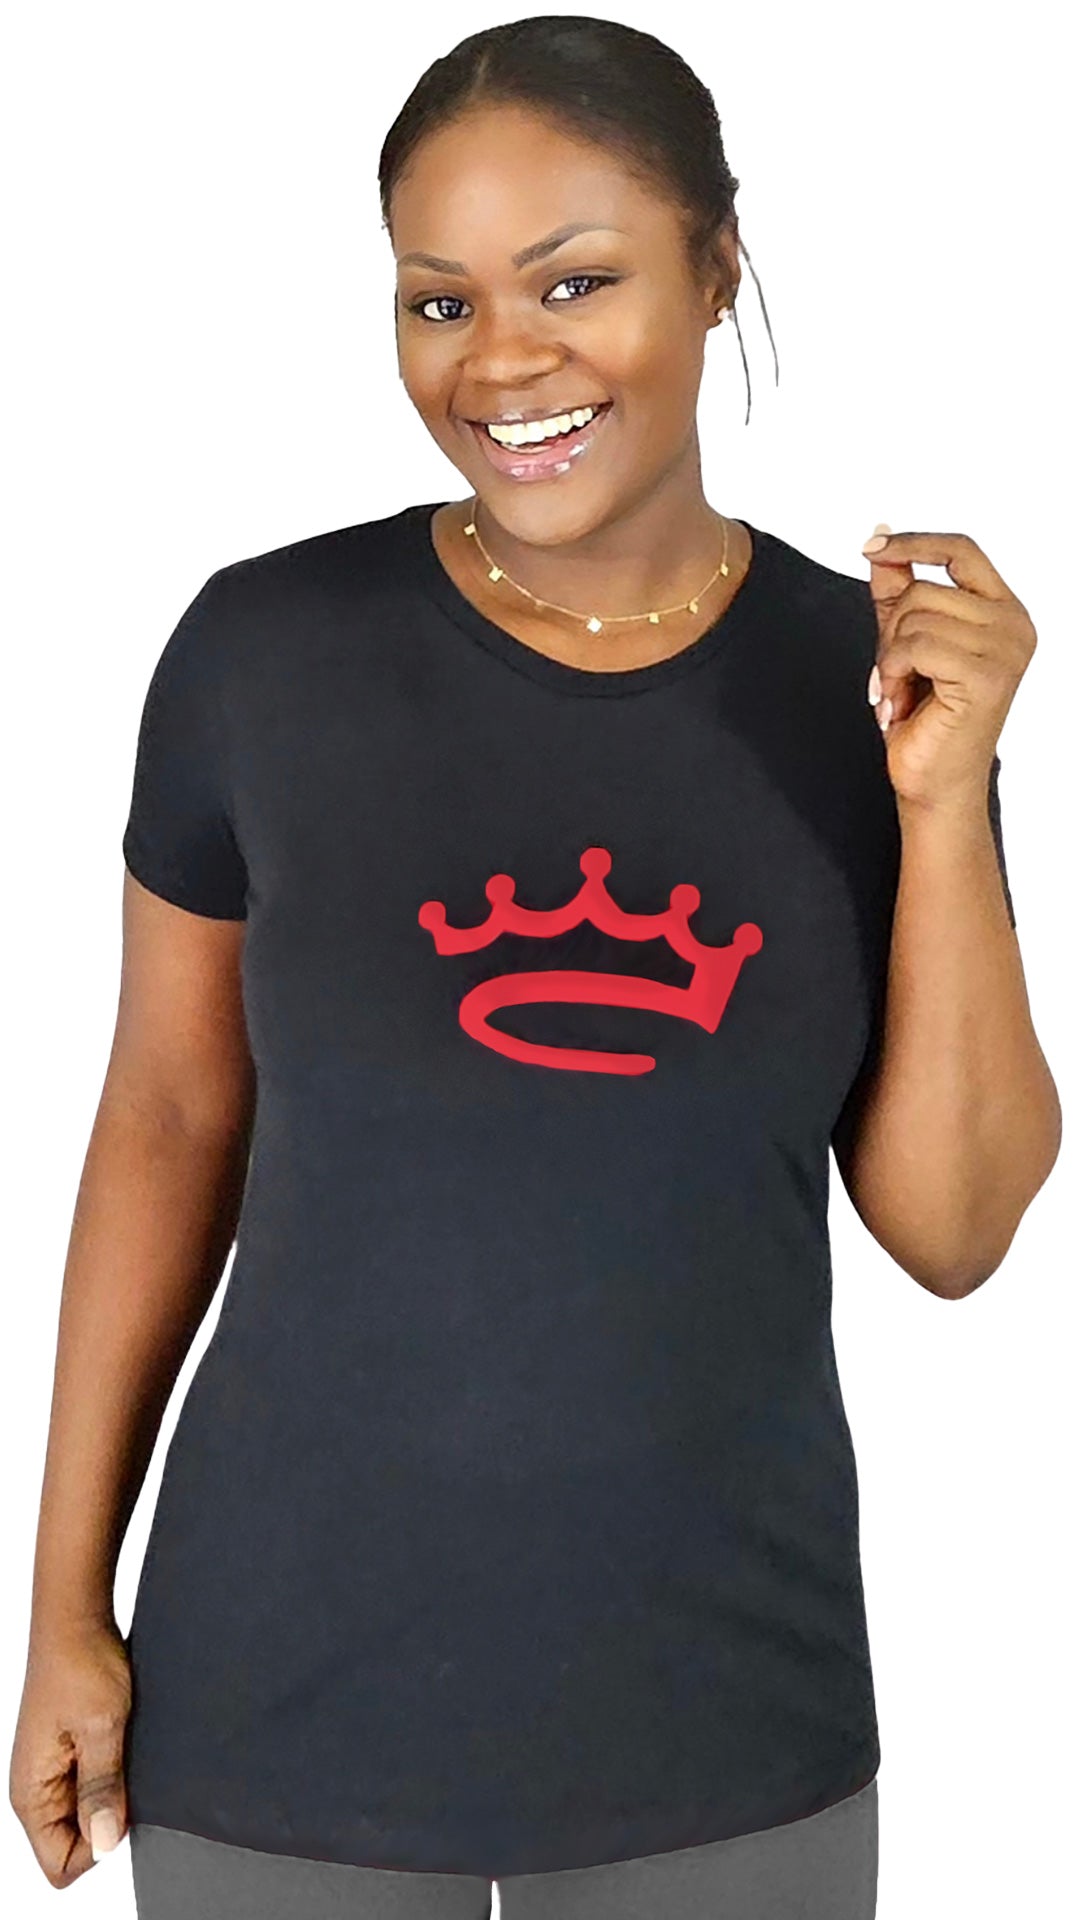 Women's Black / Red - shirt - Crowned Brand ™